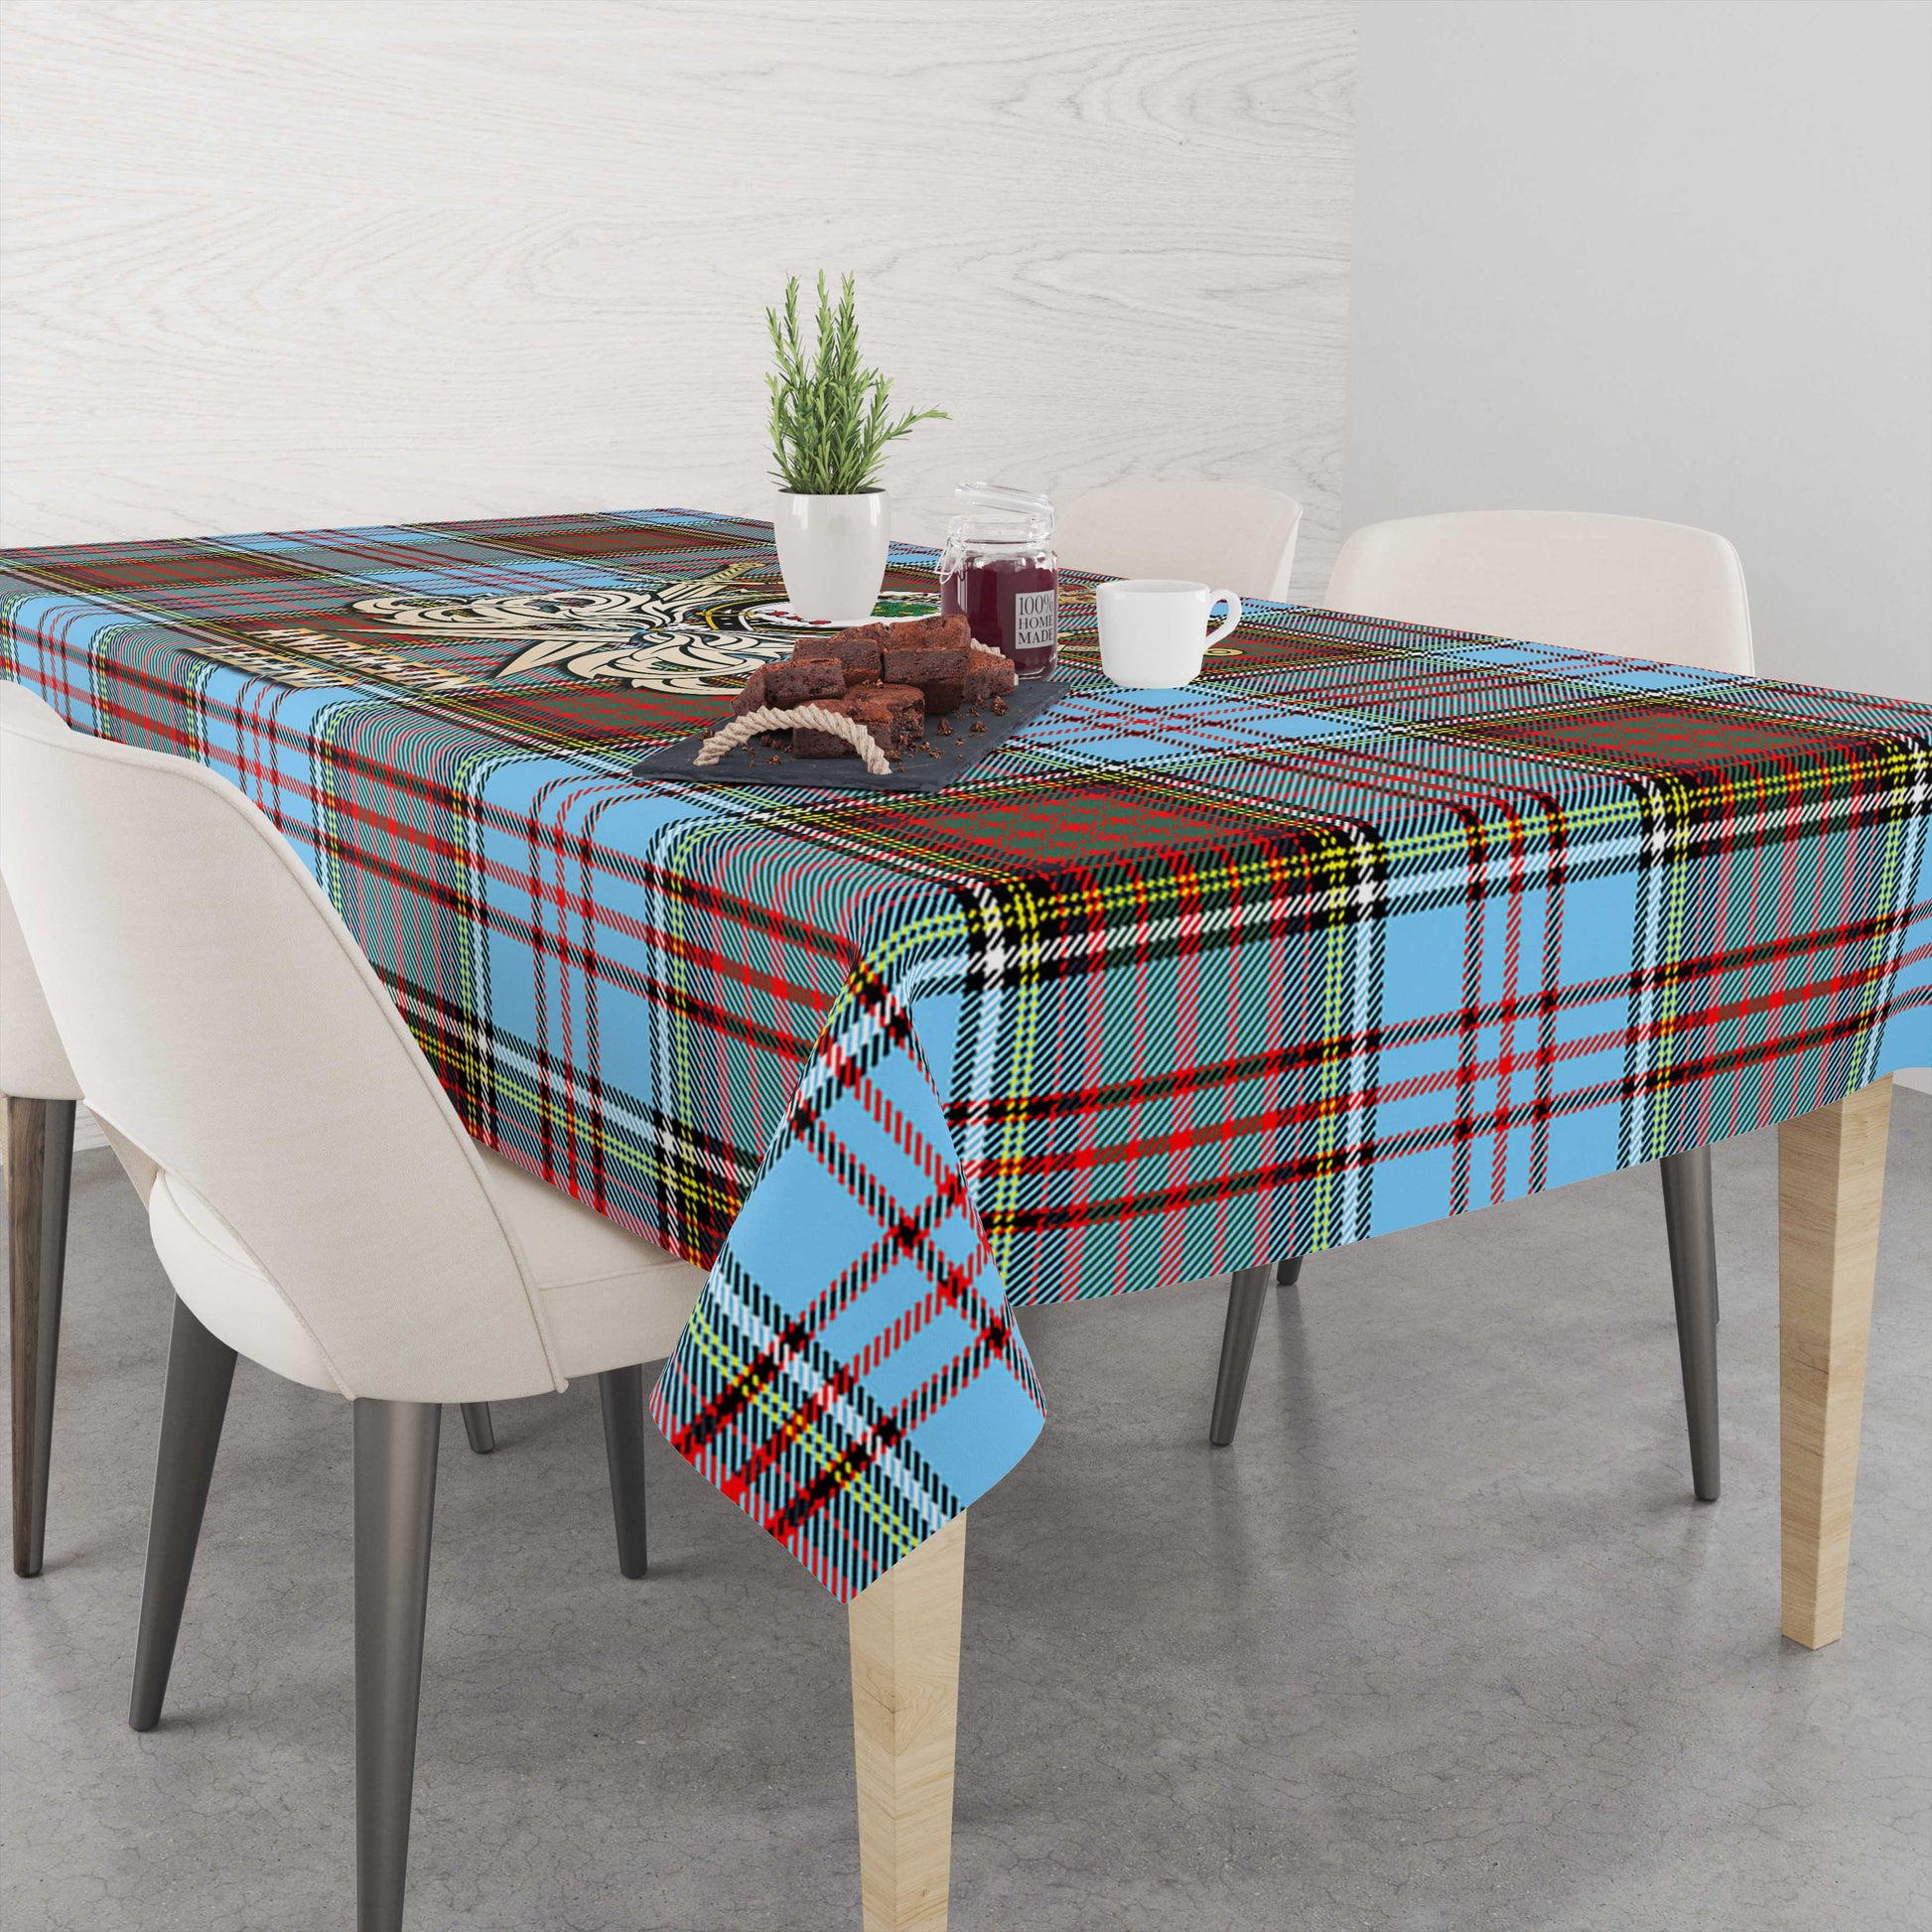 Tartan Vibes Clothing Anderson Ancient Tartan Tablecloth with Clan Crest and the Golden Sword of Courageous Legacy